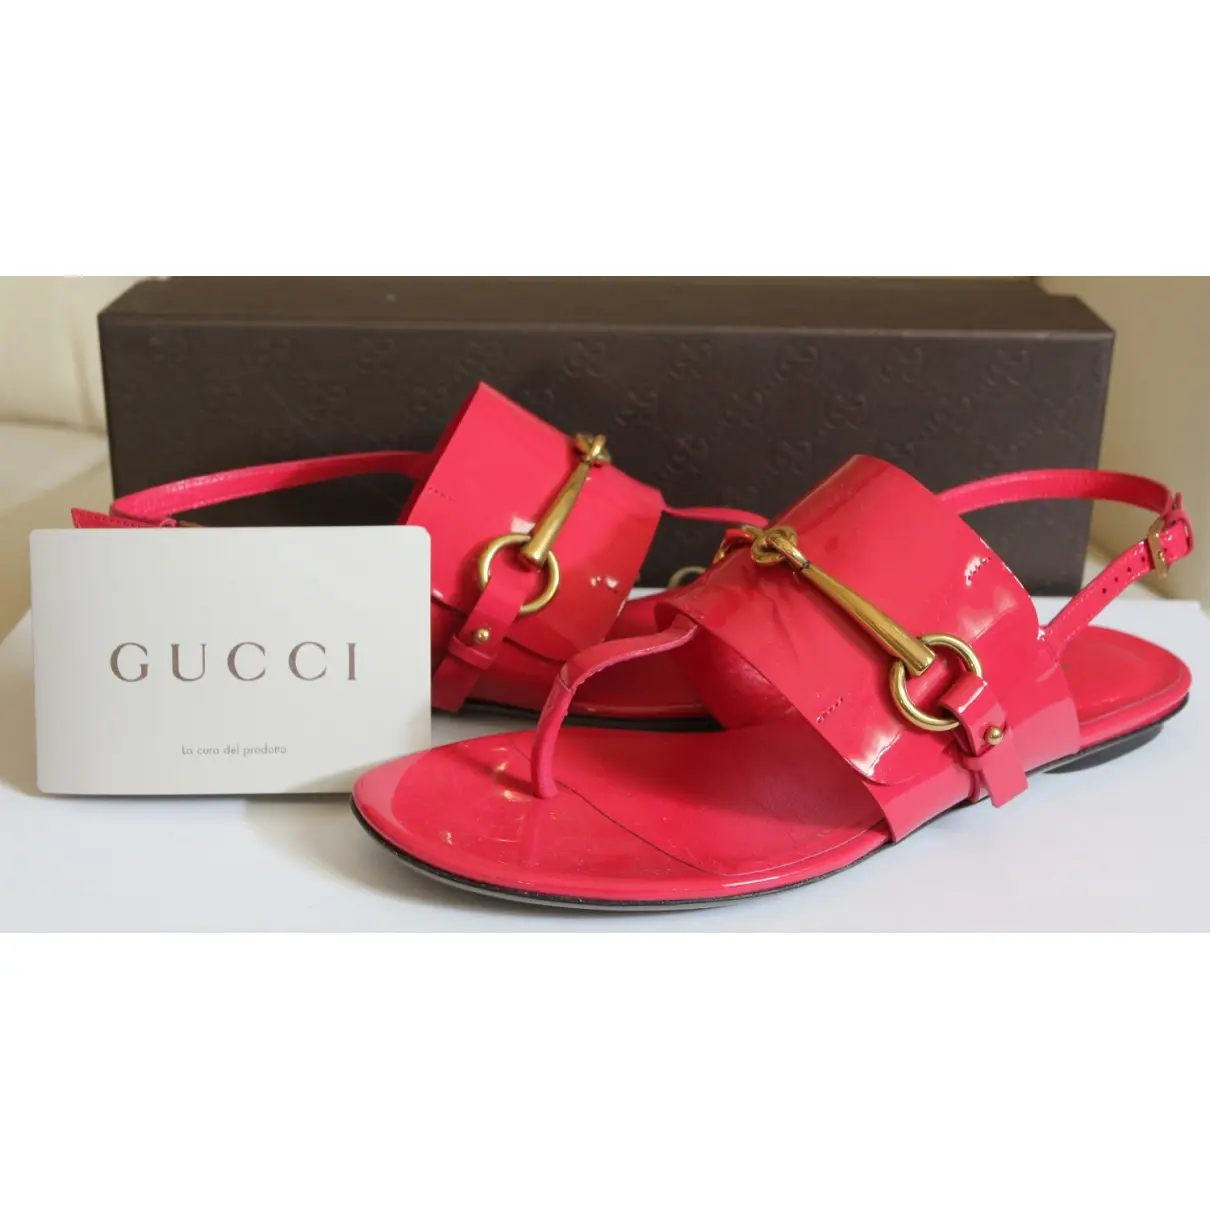 Gucci Patent leather flip flops for sale